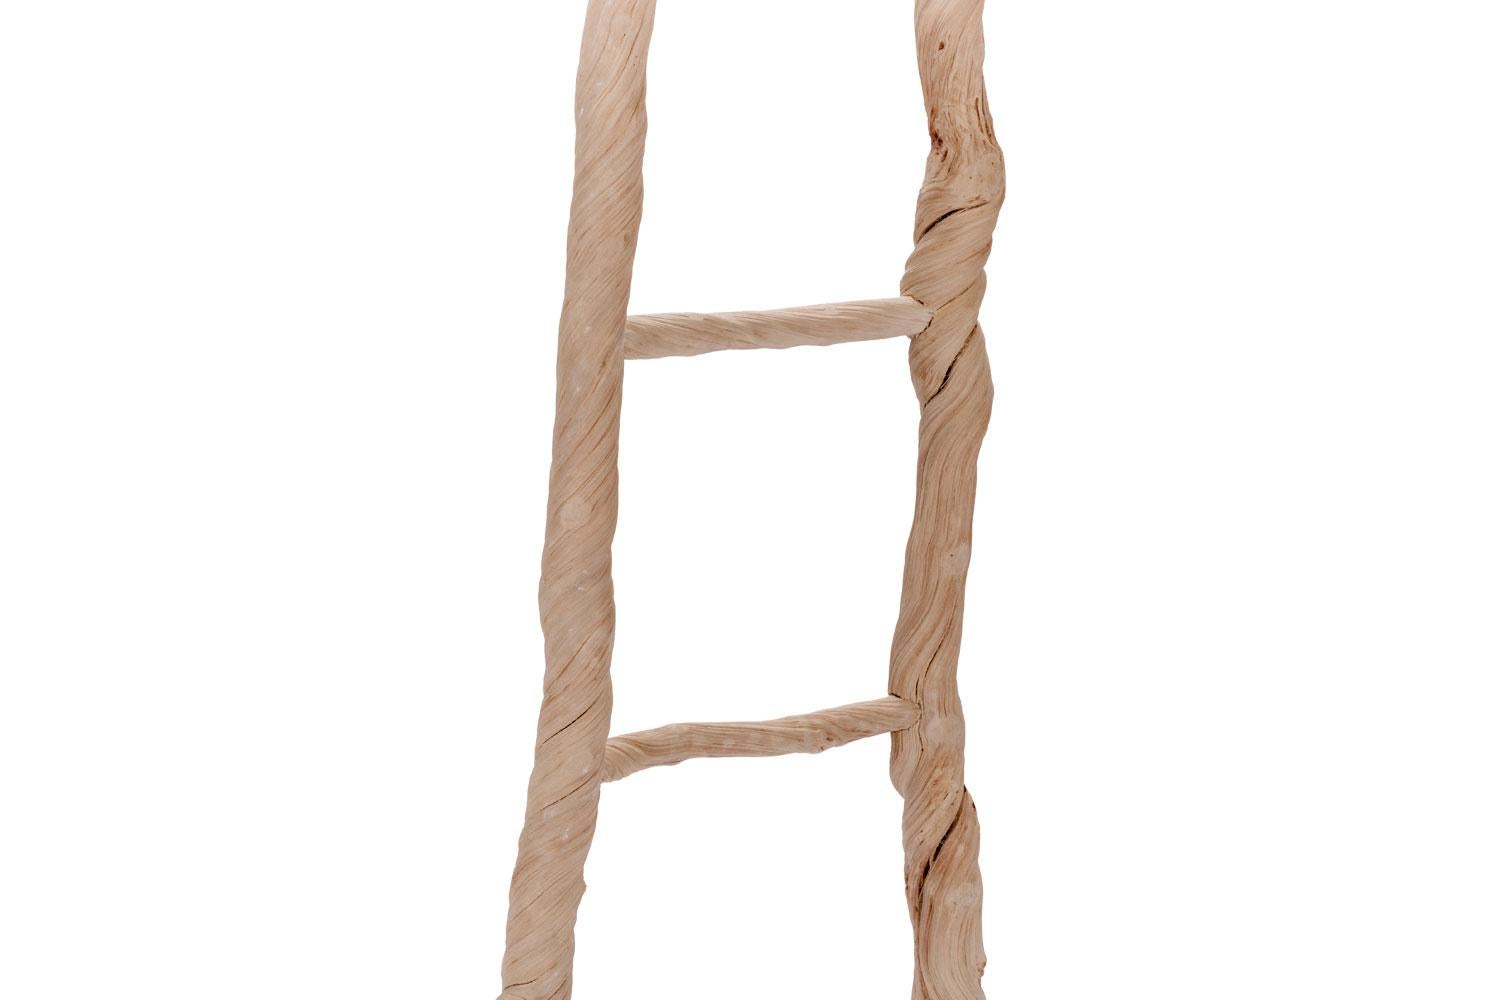 Bleached Liana Vine ladders are one of a kind and perfect for hanging linens or papers and also make a beautiful sculptural statement without displayed items. Work wonderfully as an organic, handmade element in modern spaces.

Each measures